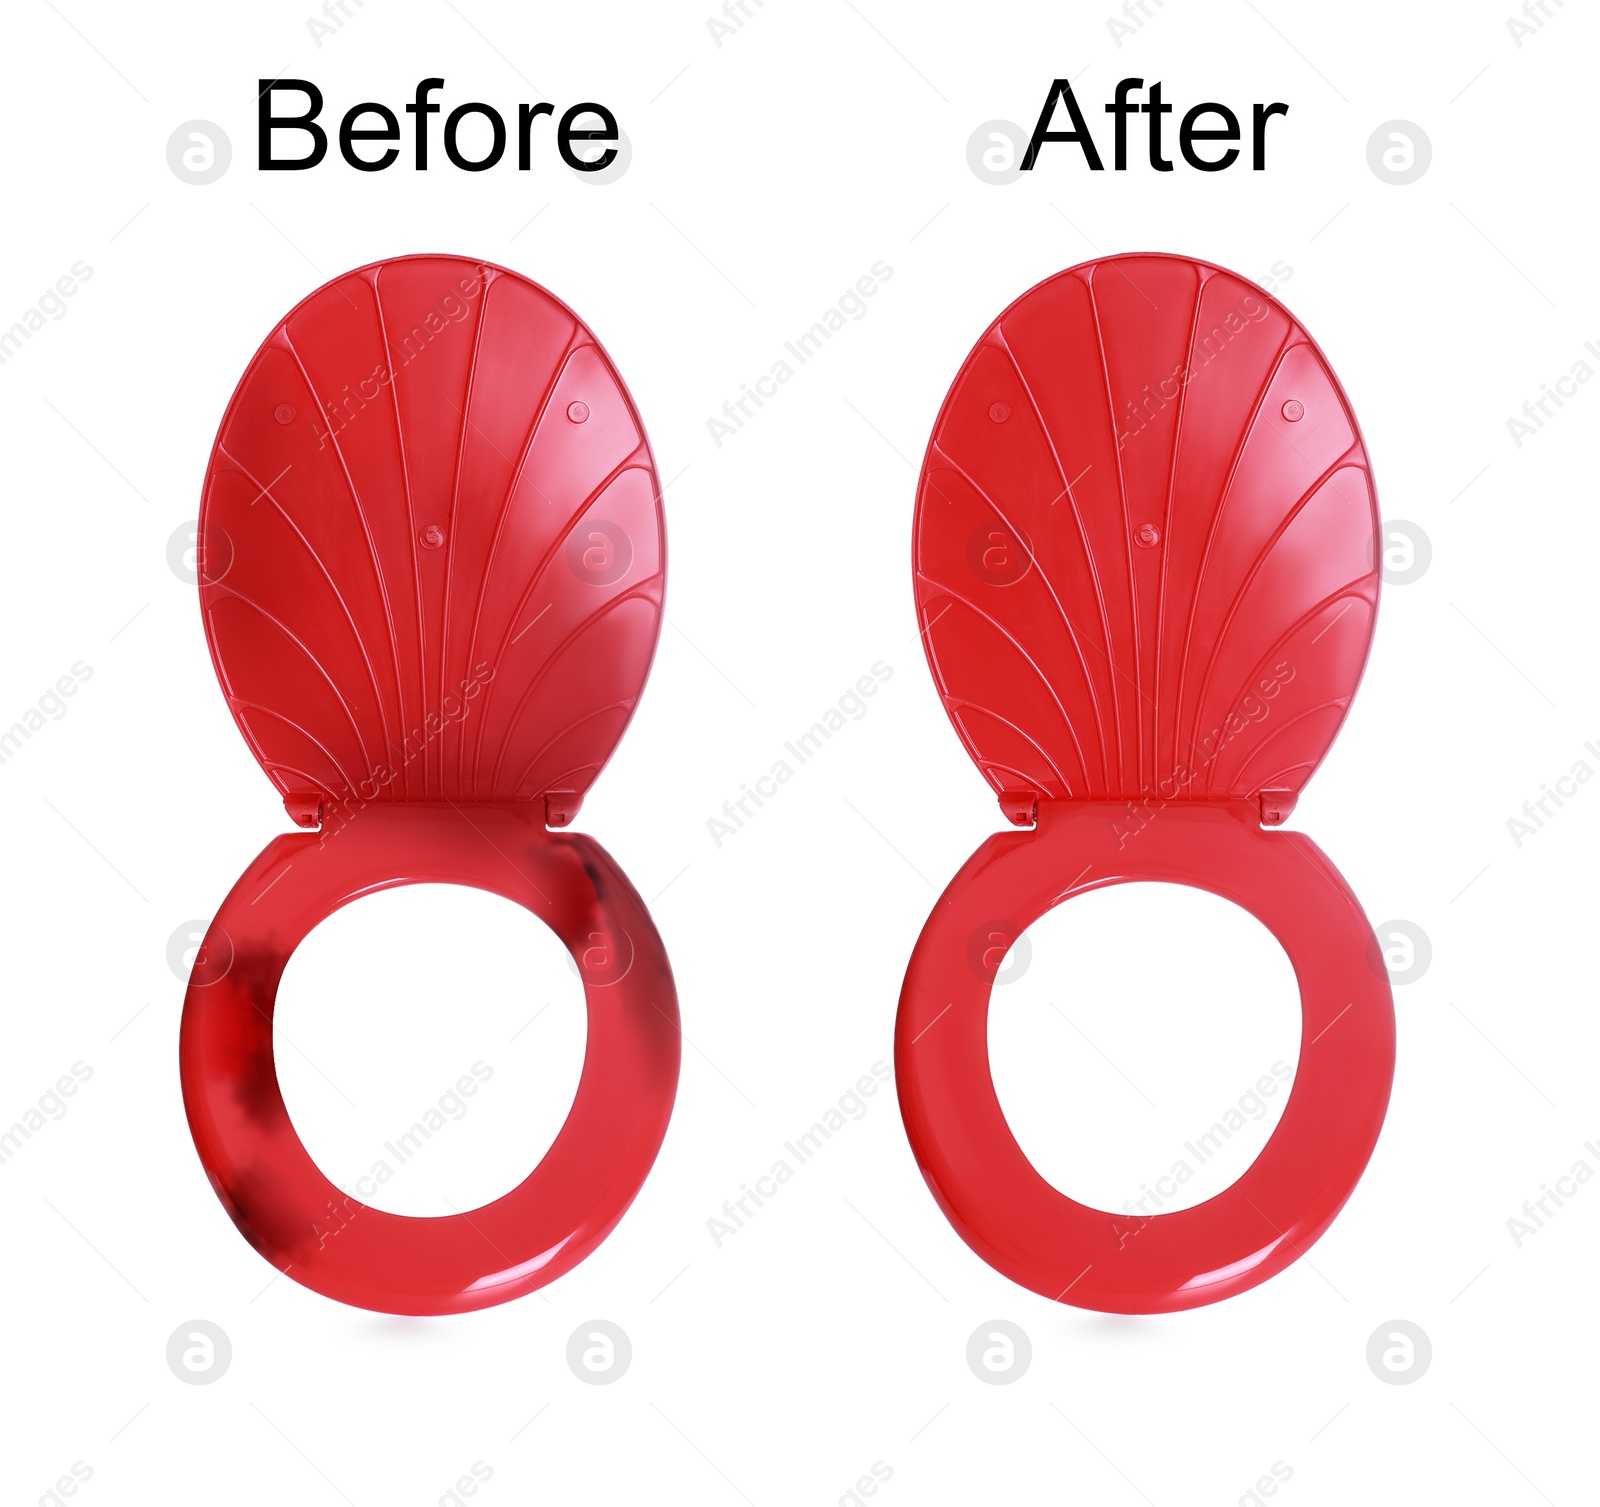 Image of Plastic toilet seats before and after cleaning on white background, collage